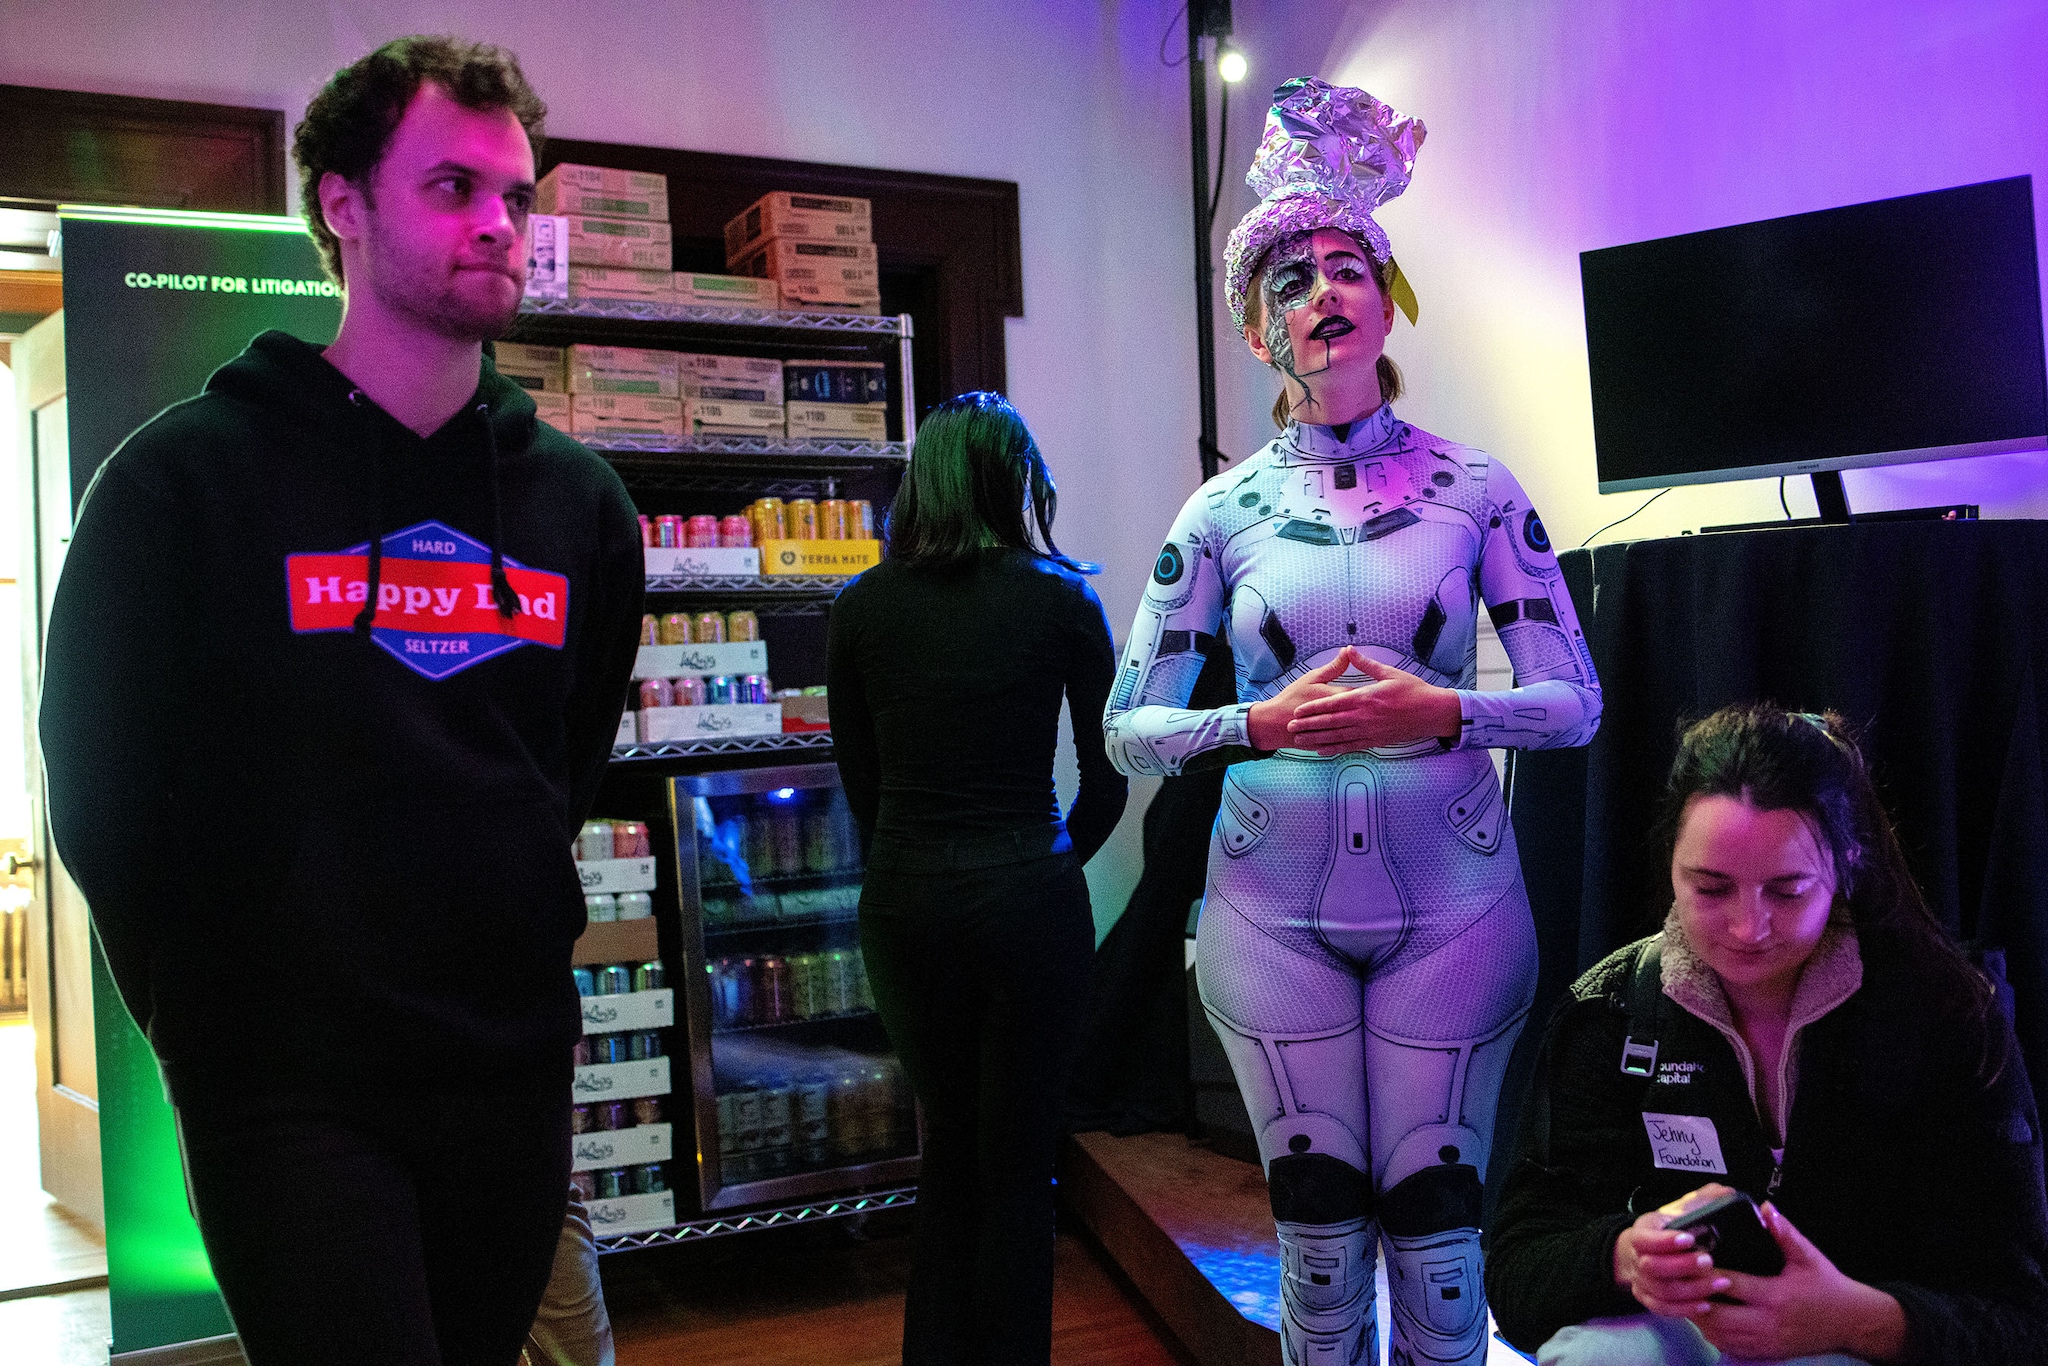 Michaela Carmein (second from right) watches demos while helping out during the HF0 Demo Day where she entertained guests by pretending to be an AI robot named “Guinevere” during the event for the start-up fellowship in San Francisco, Calf., on Tuesday, April 4, 2023. She talked to guests in character throughout the entire event. Carmein’s close friend, Emily Liu, is one of the co-founders of HF0, and she helped her friend create a memorable event with the costume and act. Demo days at other programs can often be routine events with start-ups mostly giving slide deck presentations, but the HF0 team added creative details throughout their demo day to make the event fun for guests.